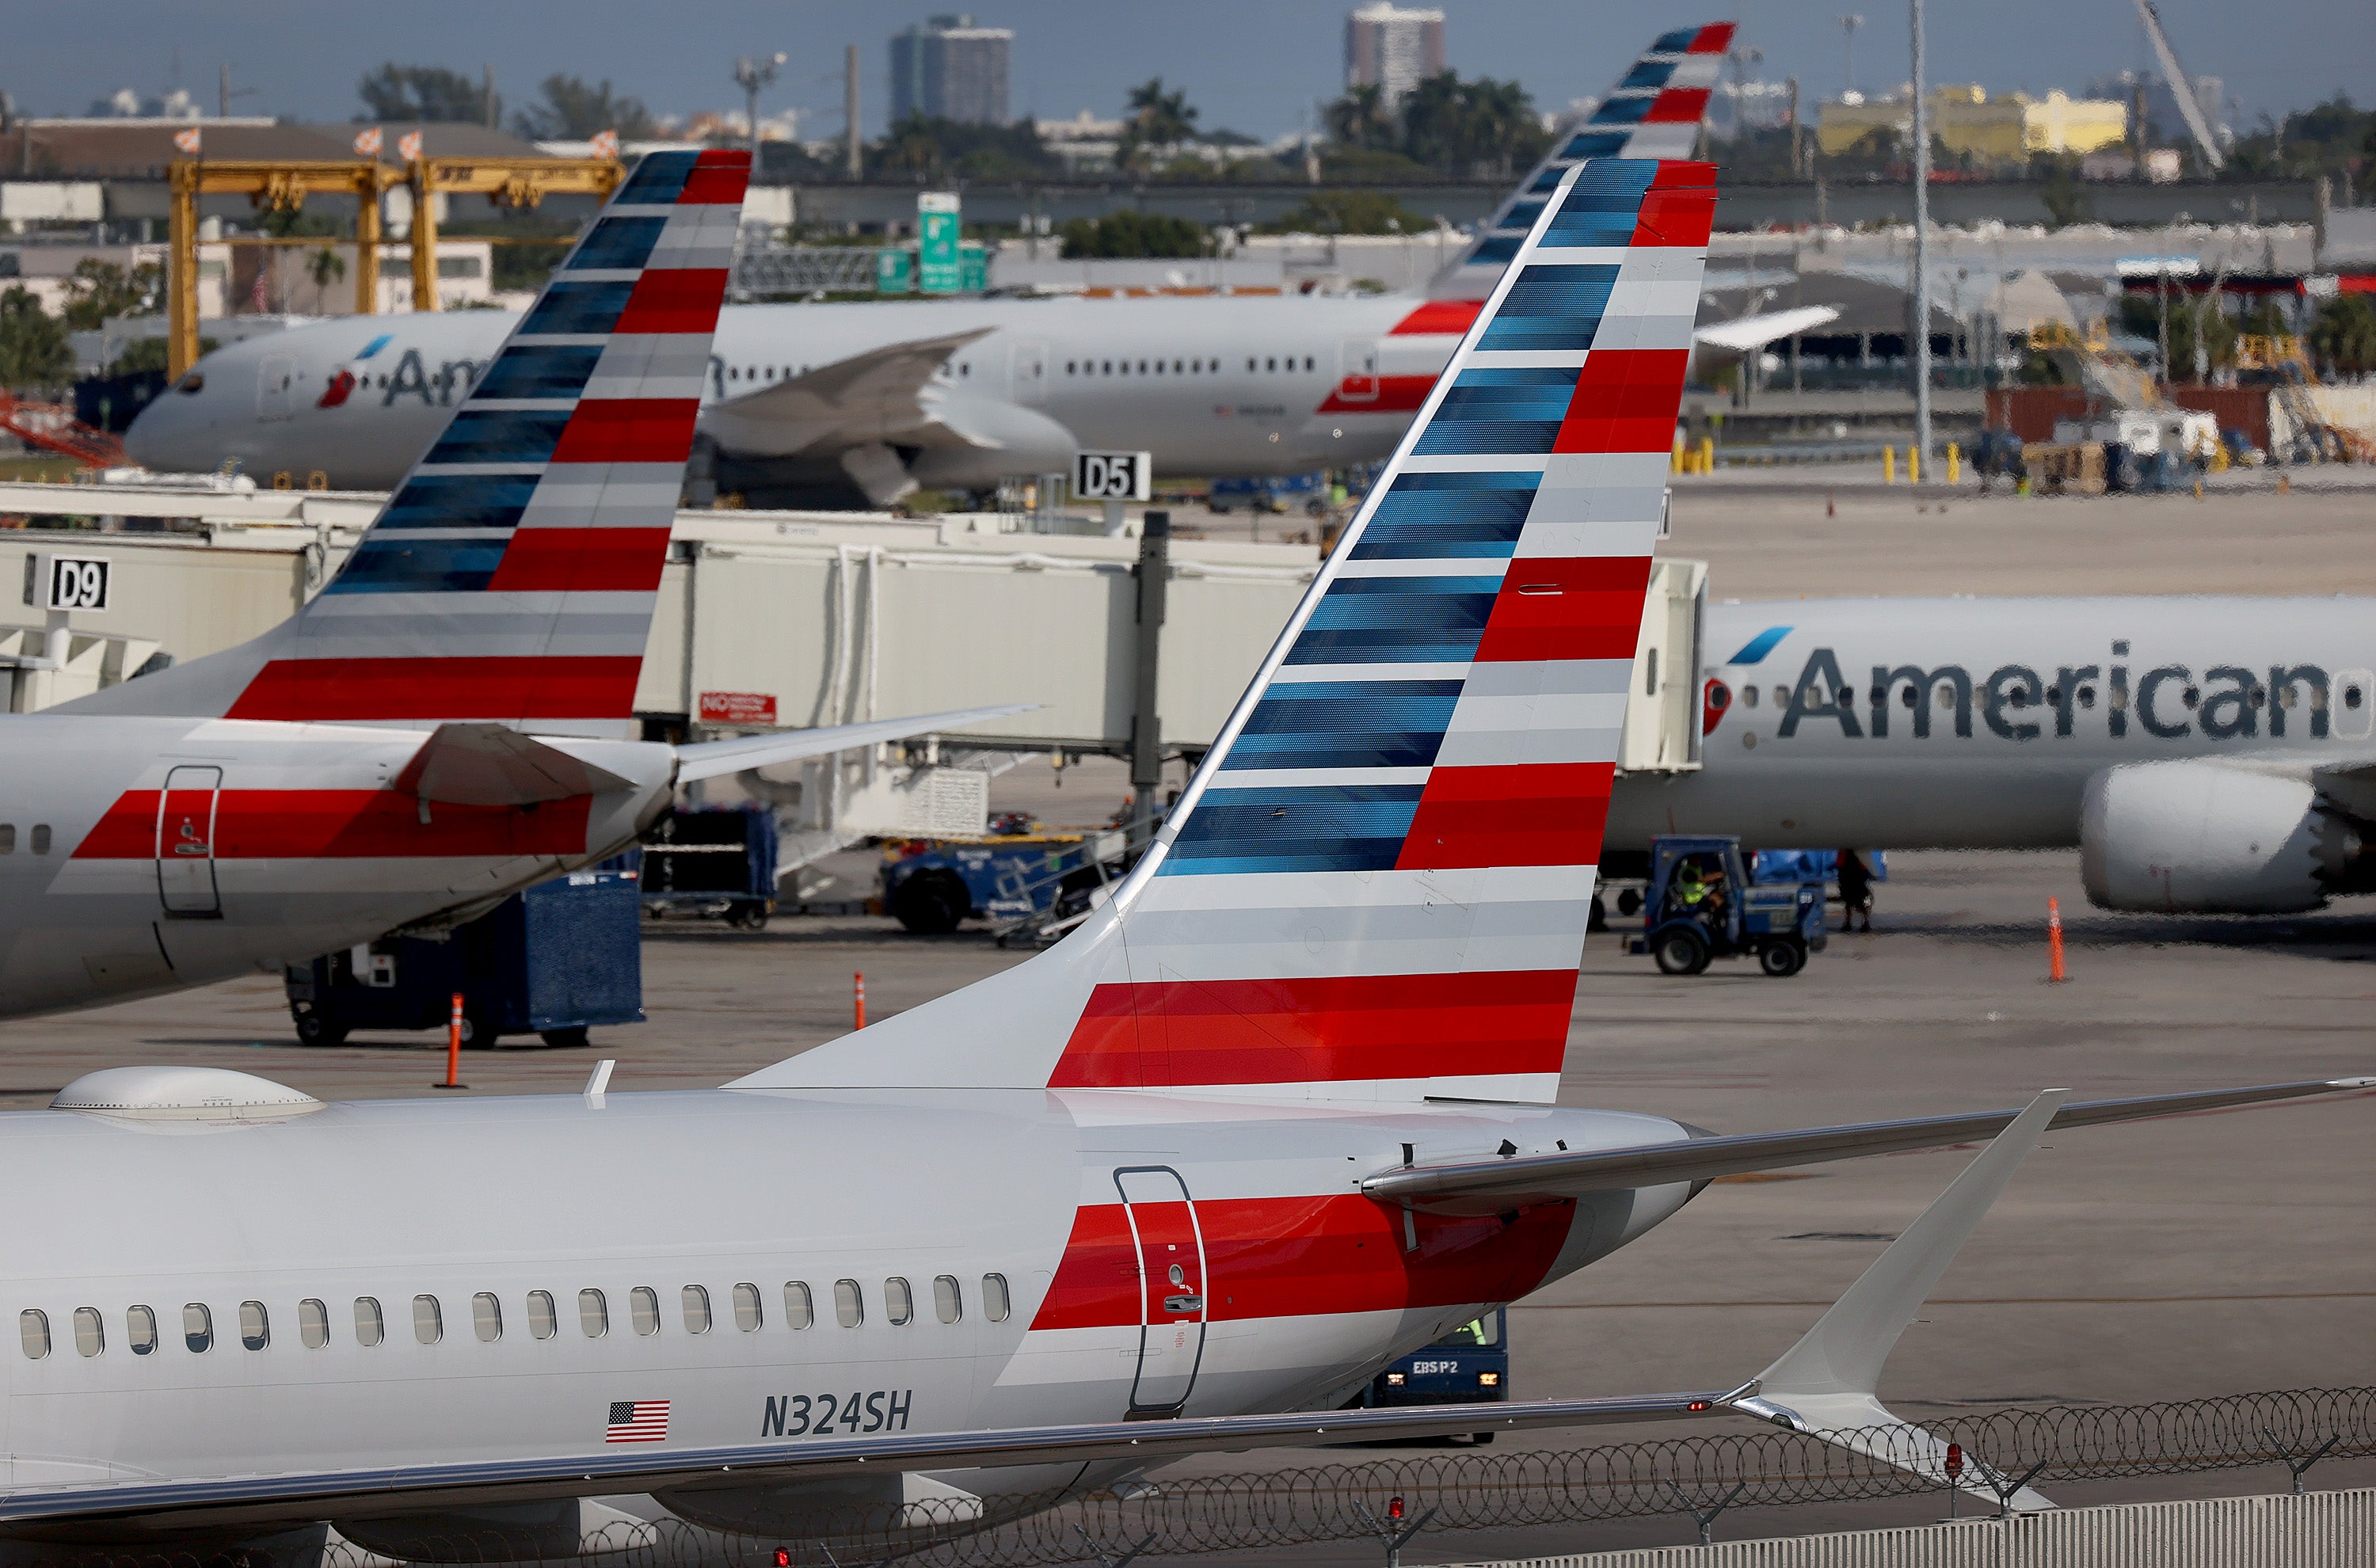 File: American Airlines planes parked at their gates in the Miami International Airport on 10 December 2021 in Miami, Florida